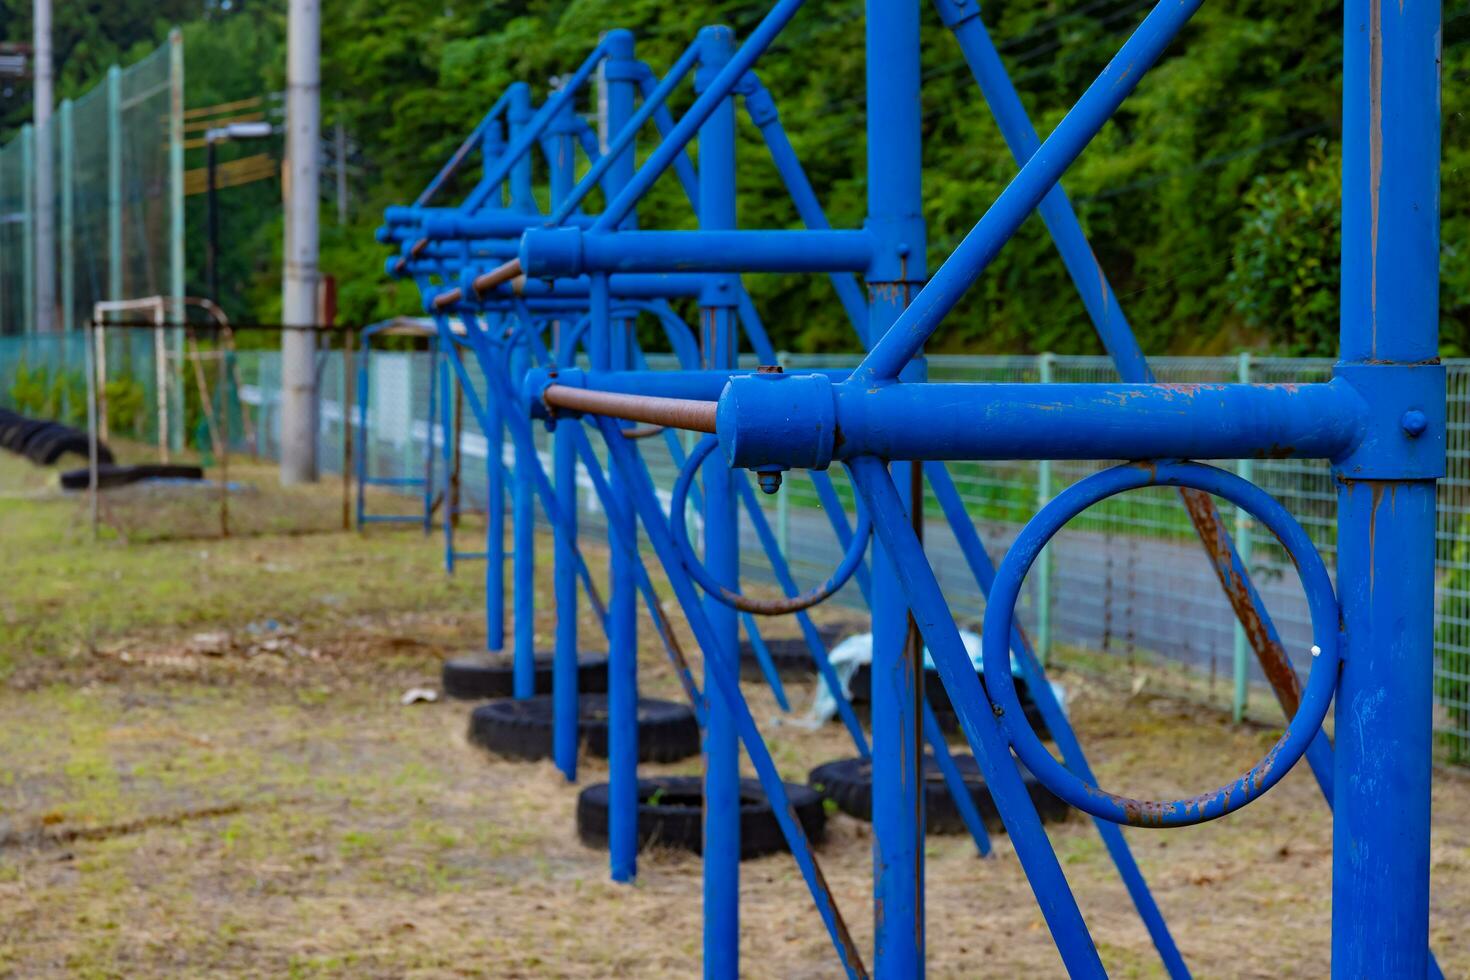 A playground equipment of the closed elementary school ground close up photo